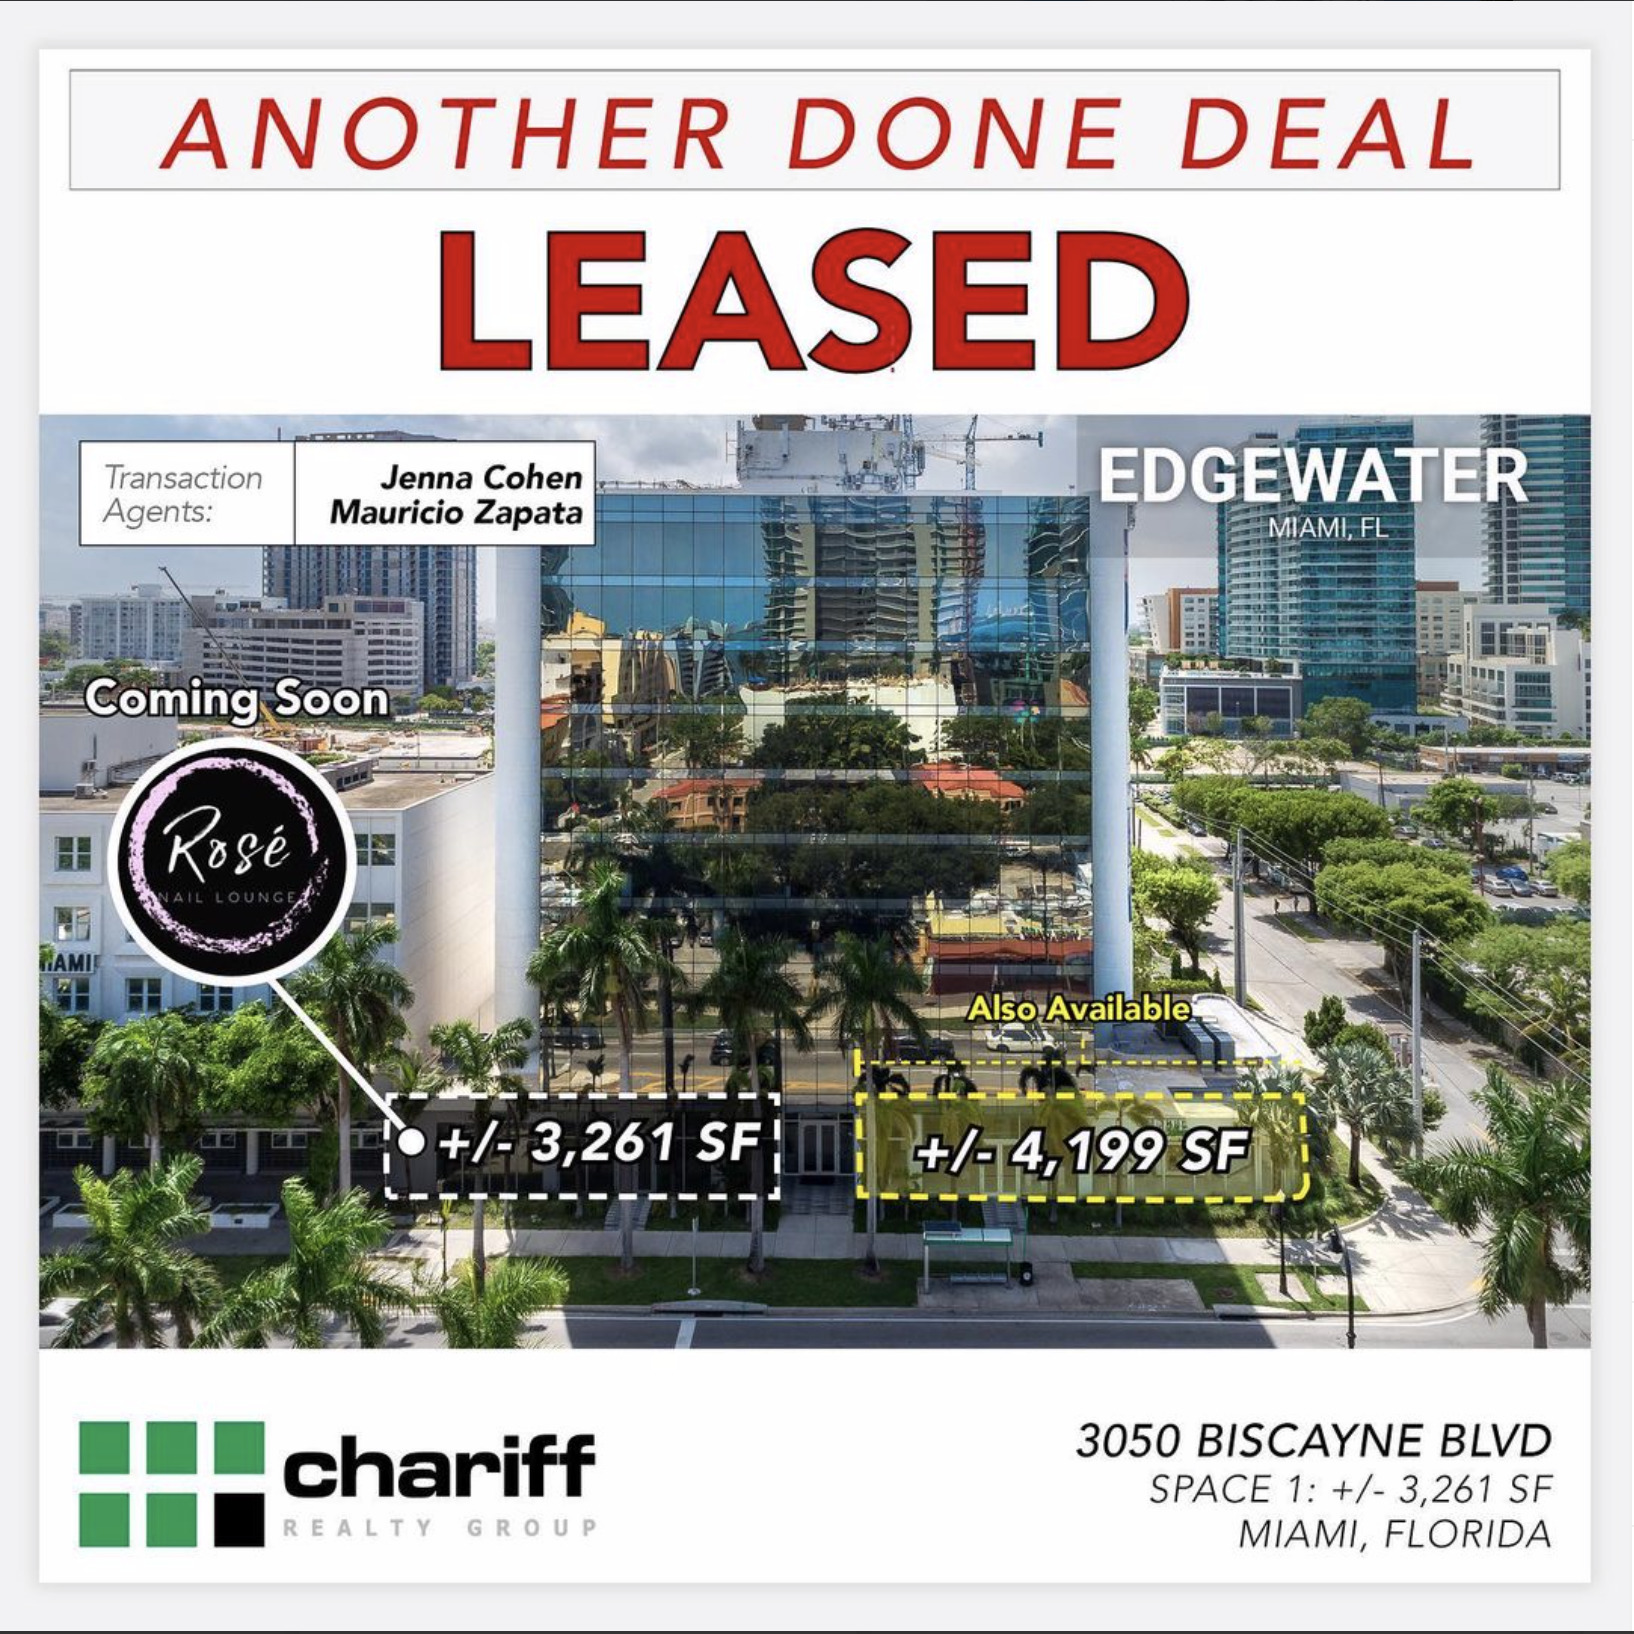 anotherdonedeal-leased-3050 biscayne blvd - Retail 1 - Edgewater - Miami - Florida 33137 - Chariff Realty Group